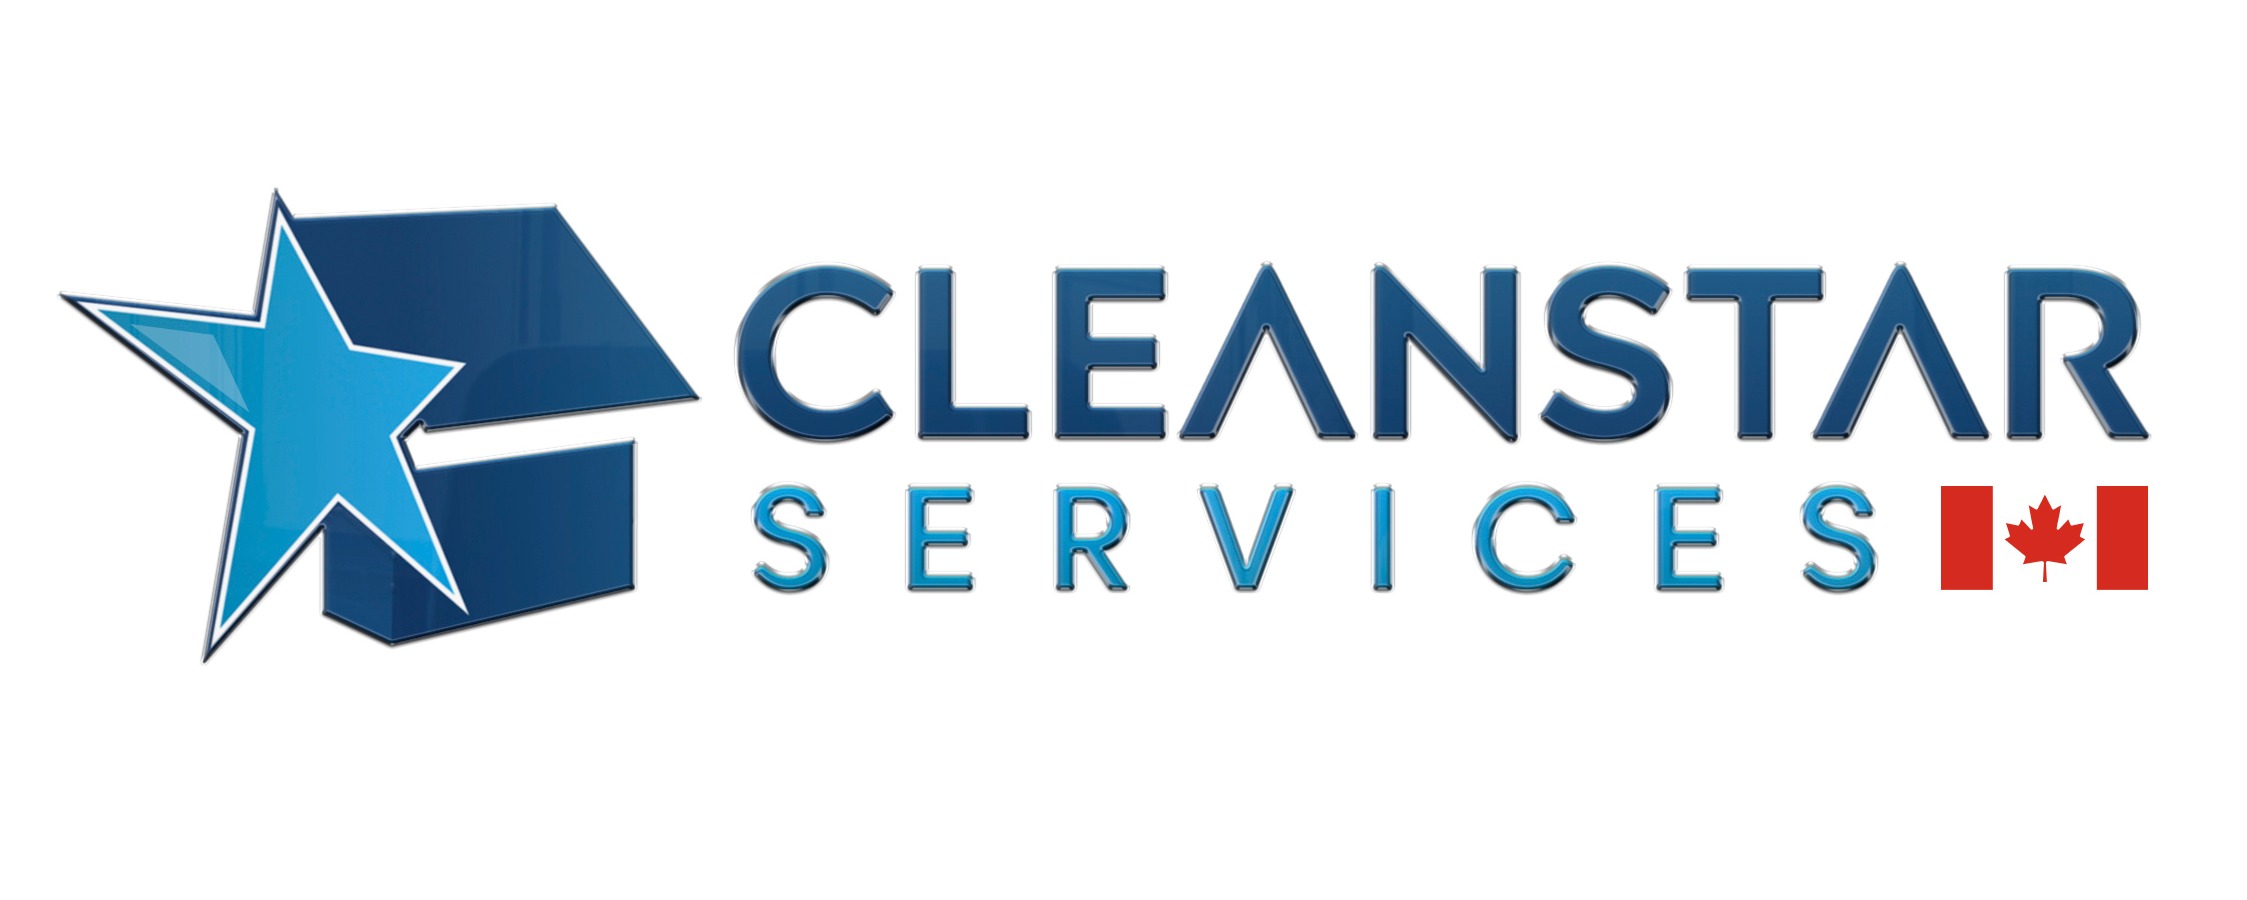 CleanStar offers effective grease removal techniques in your home